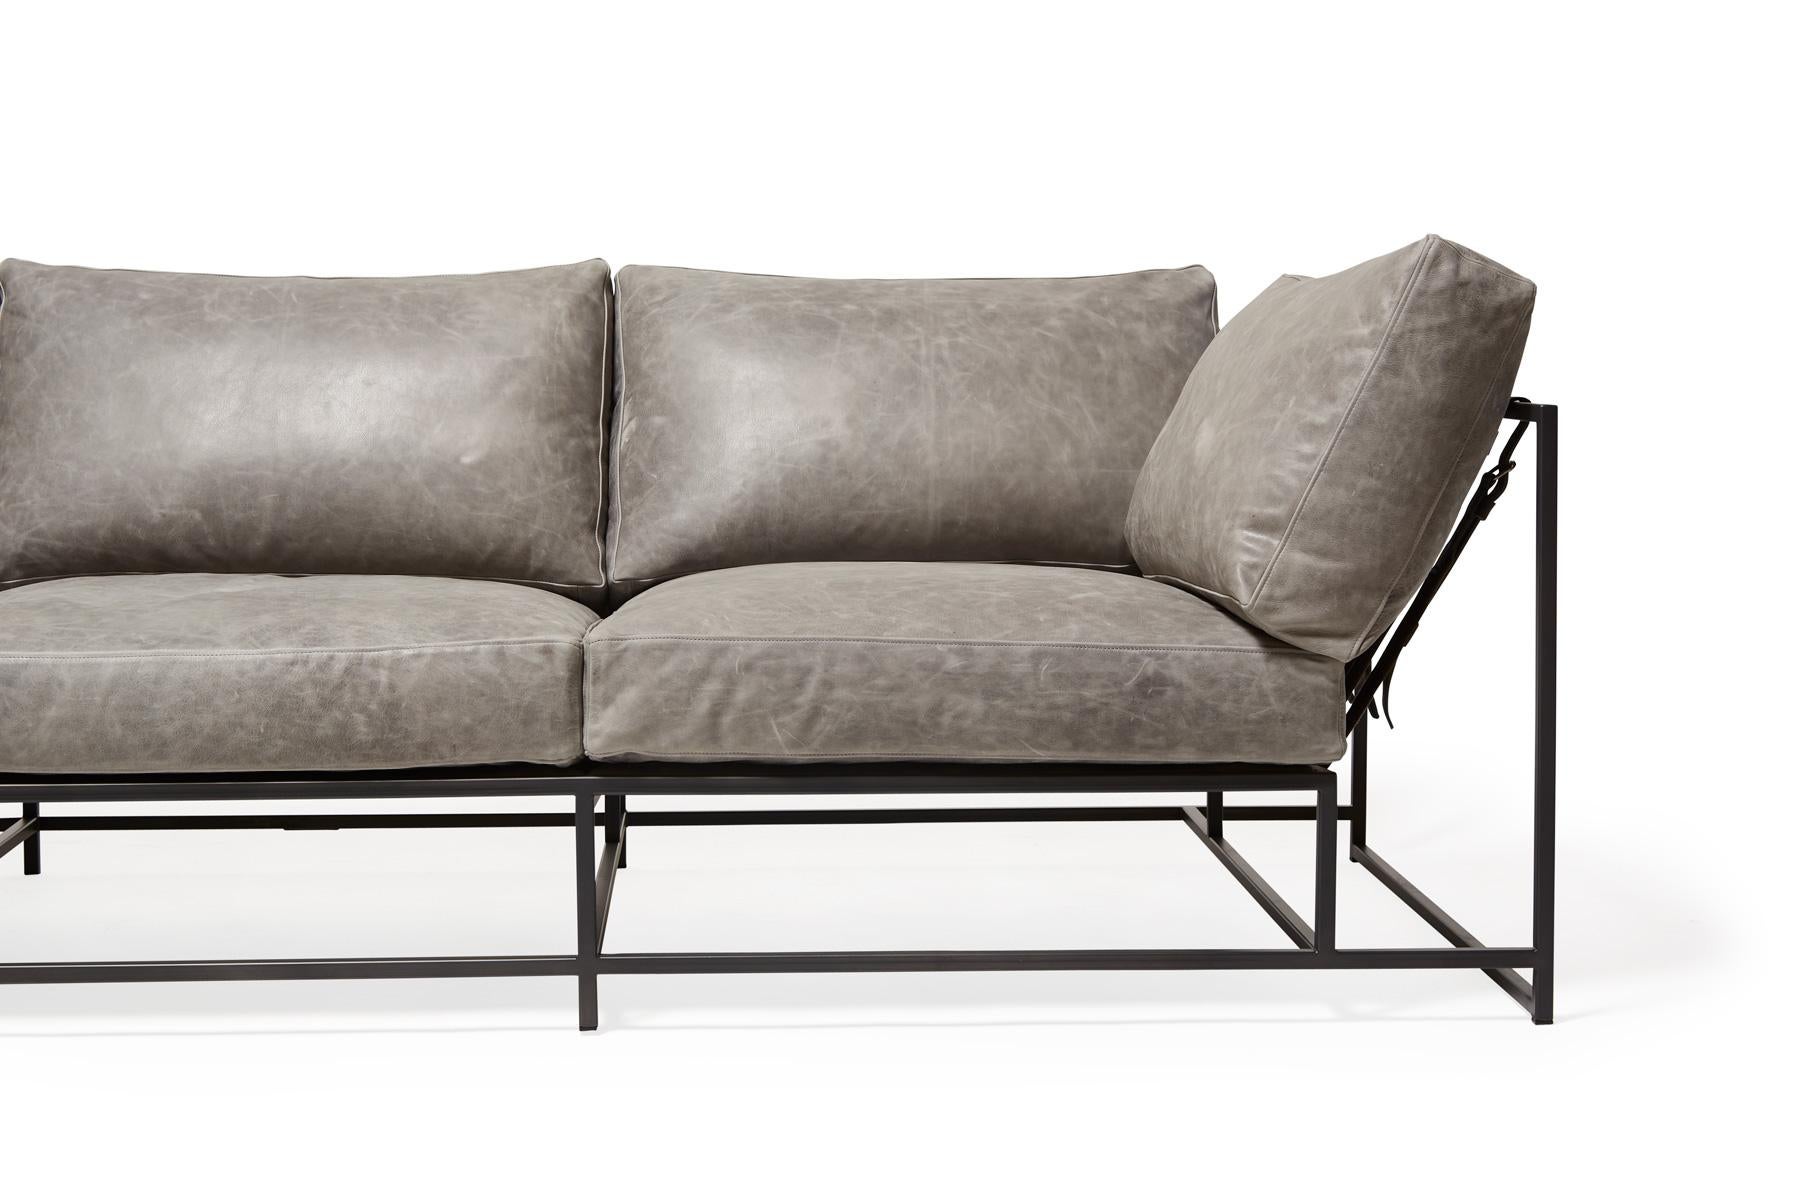 Metalwork Grey Waxed Leather Sofa with Charcoal Powdercoat For Sale